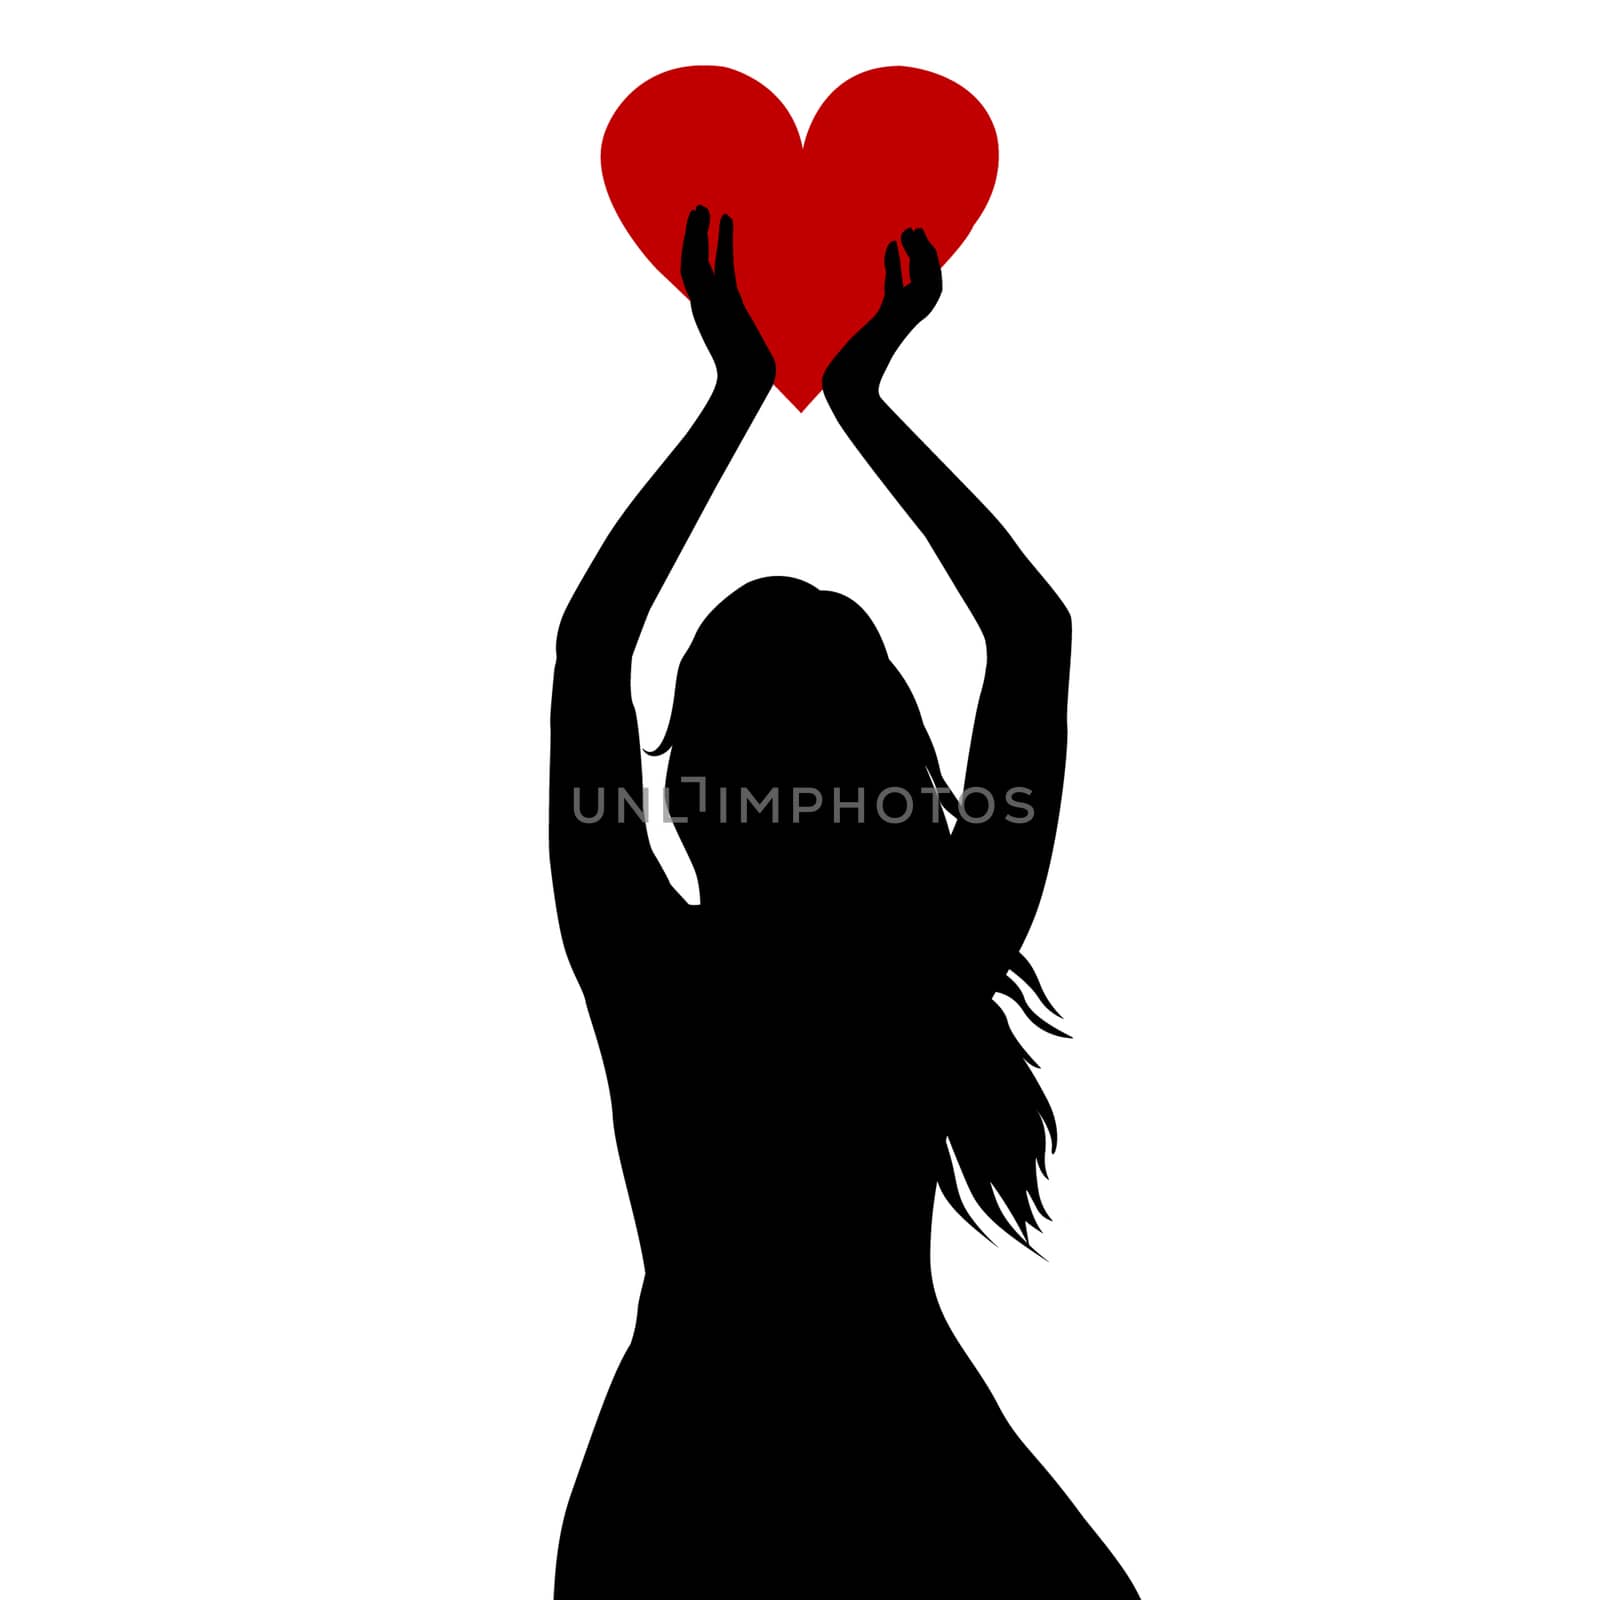 Woman silhouette holding a big red heart in her hands by hibrida13